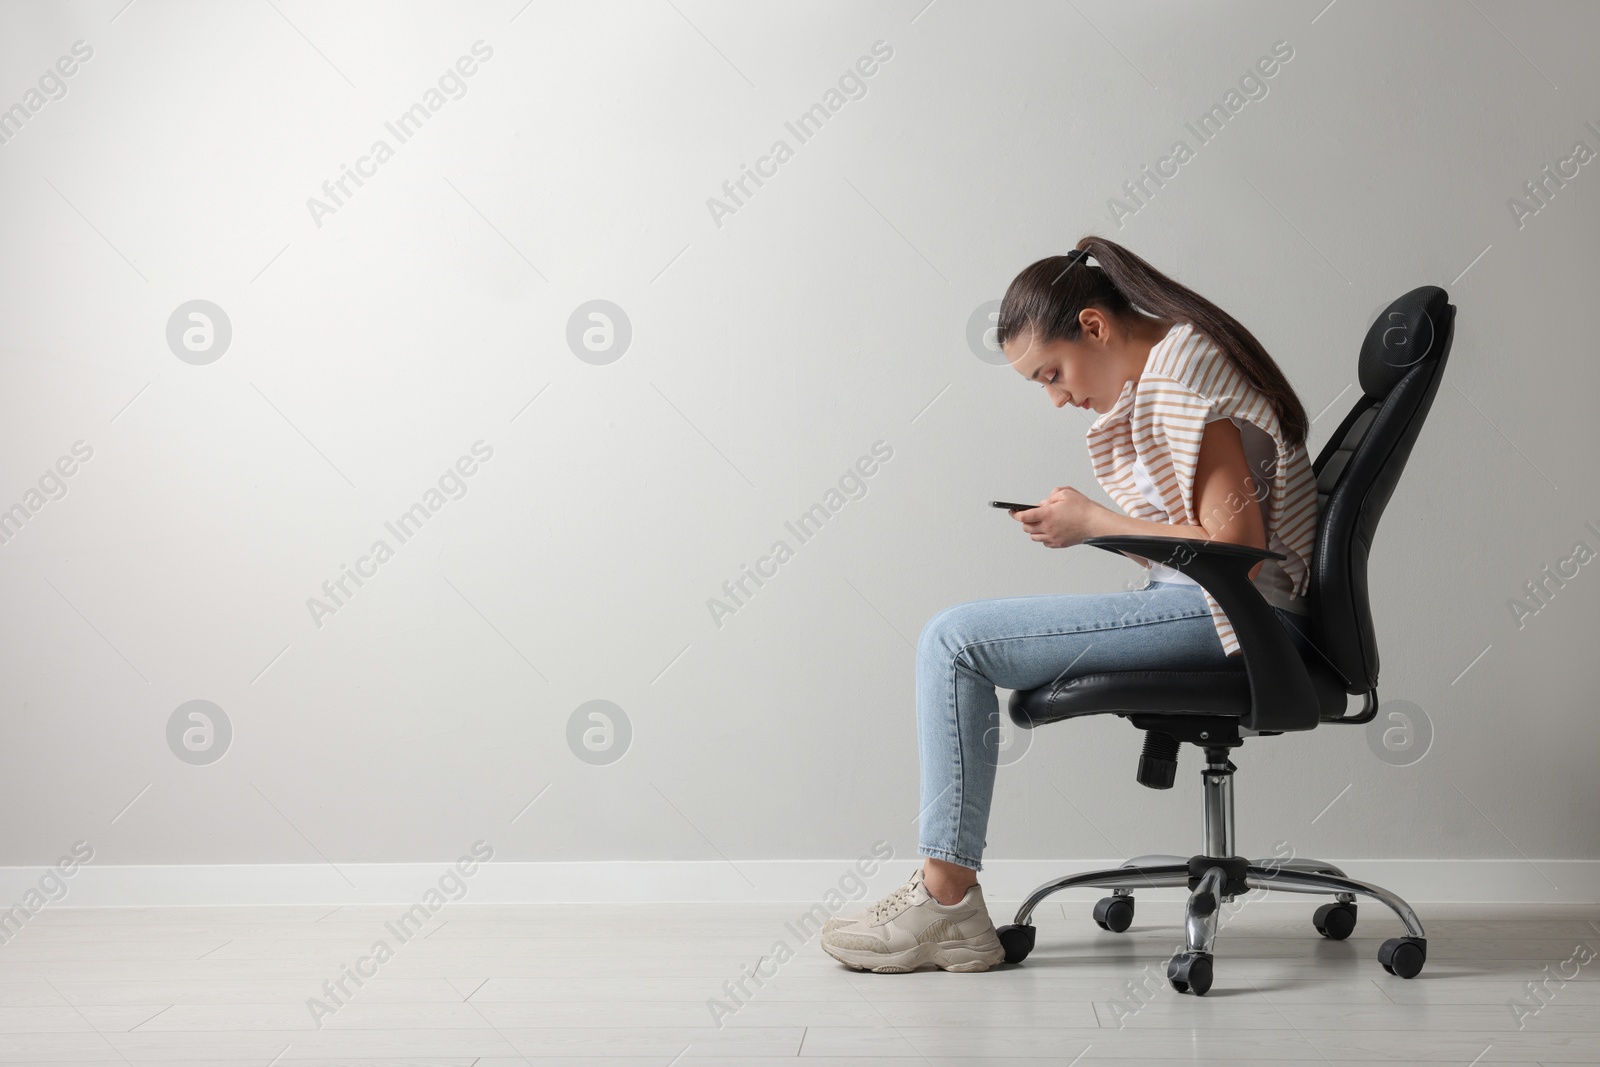 Photo of Young woman with poor posture using smartphone while sitting on chair near grey wall, space for text